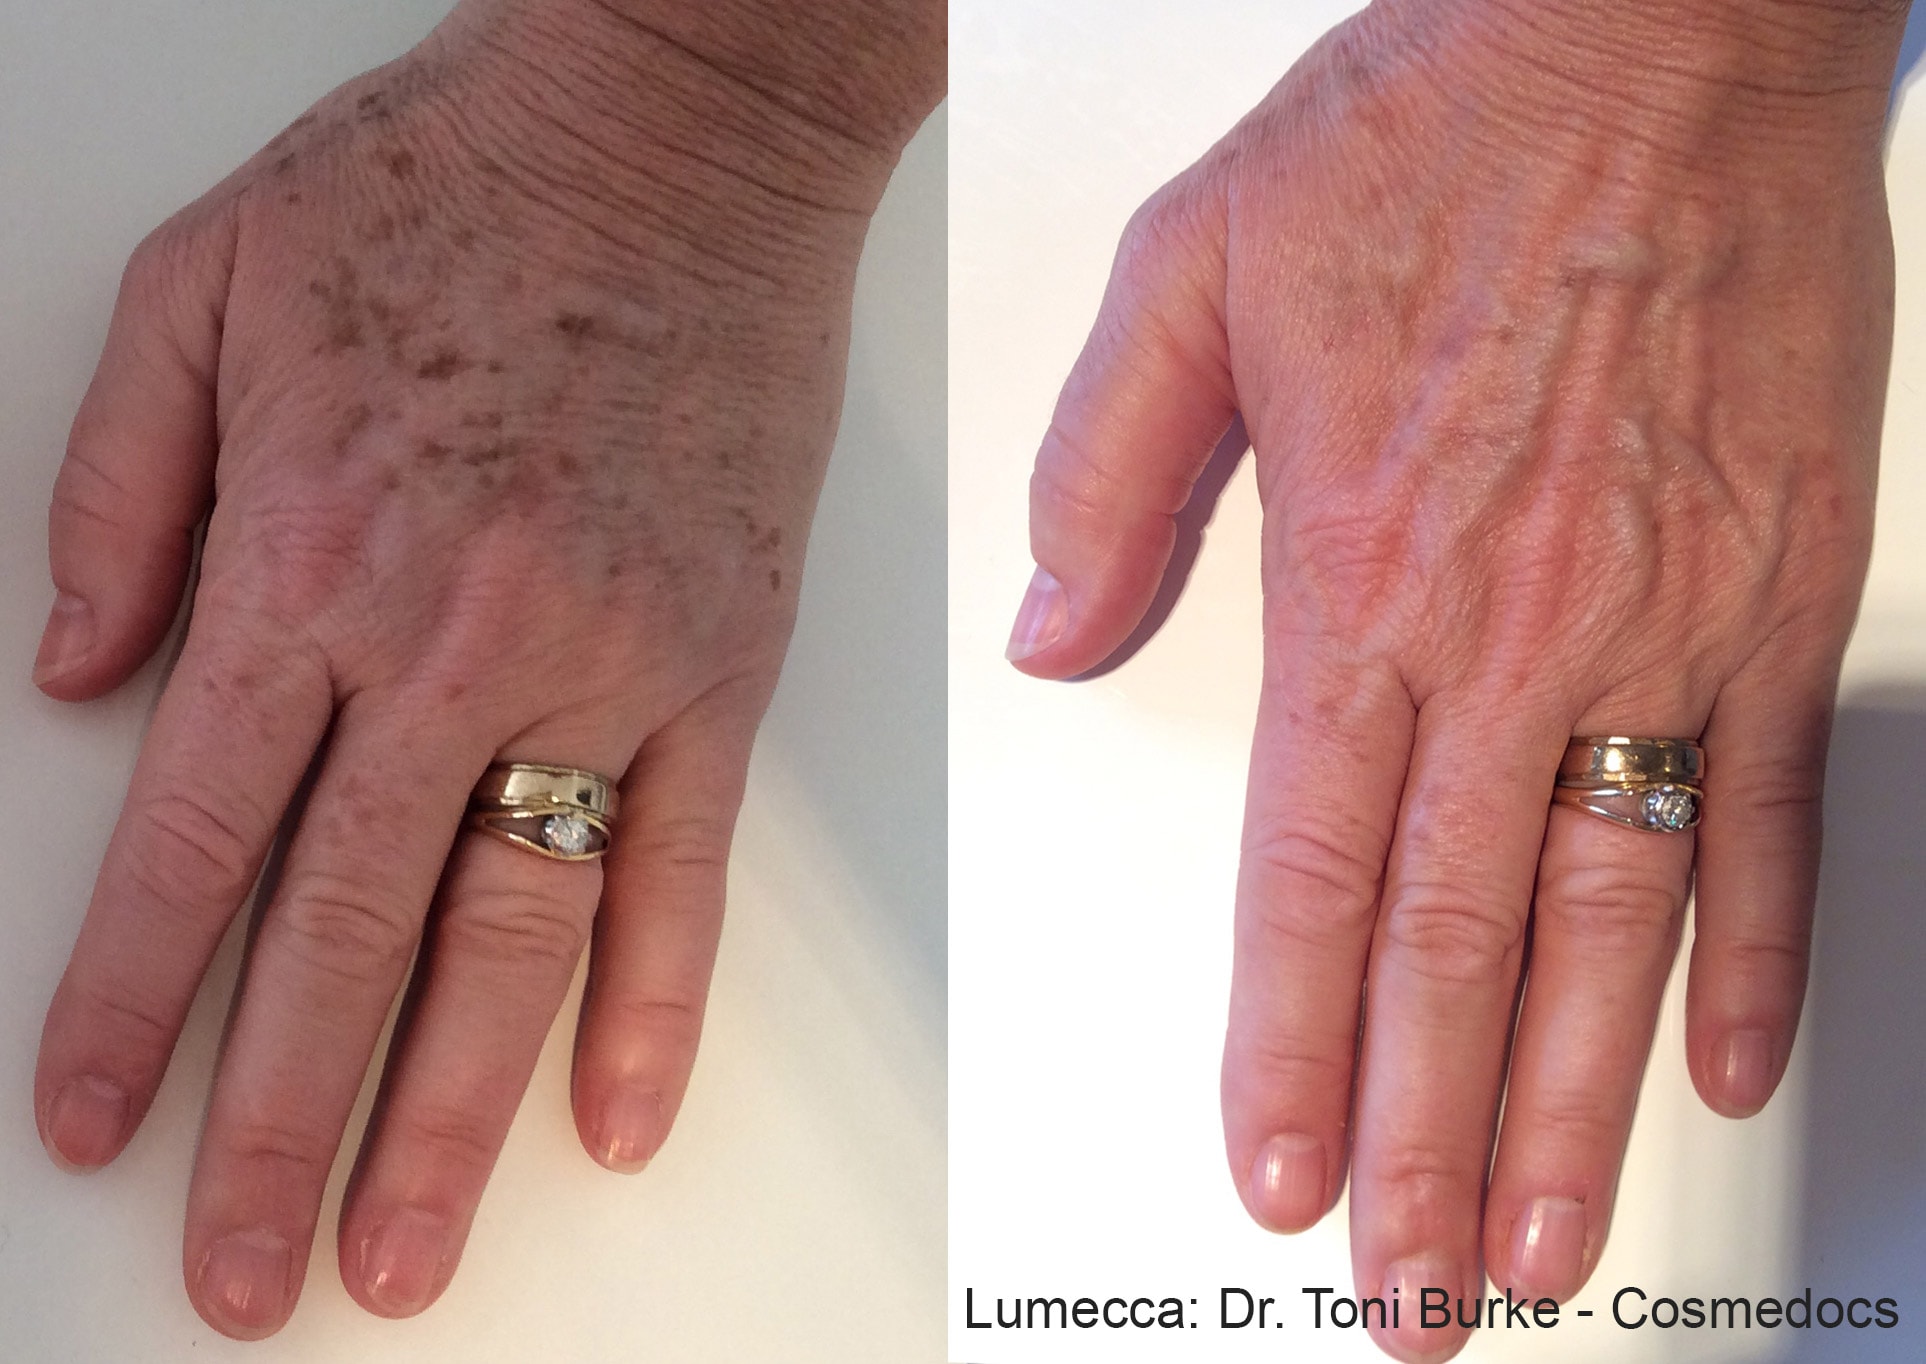 Before and After photos showing the results of Lumecca treatments for the elimination of sunspots and age spots on the hands